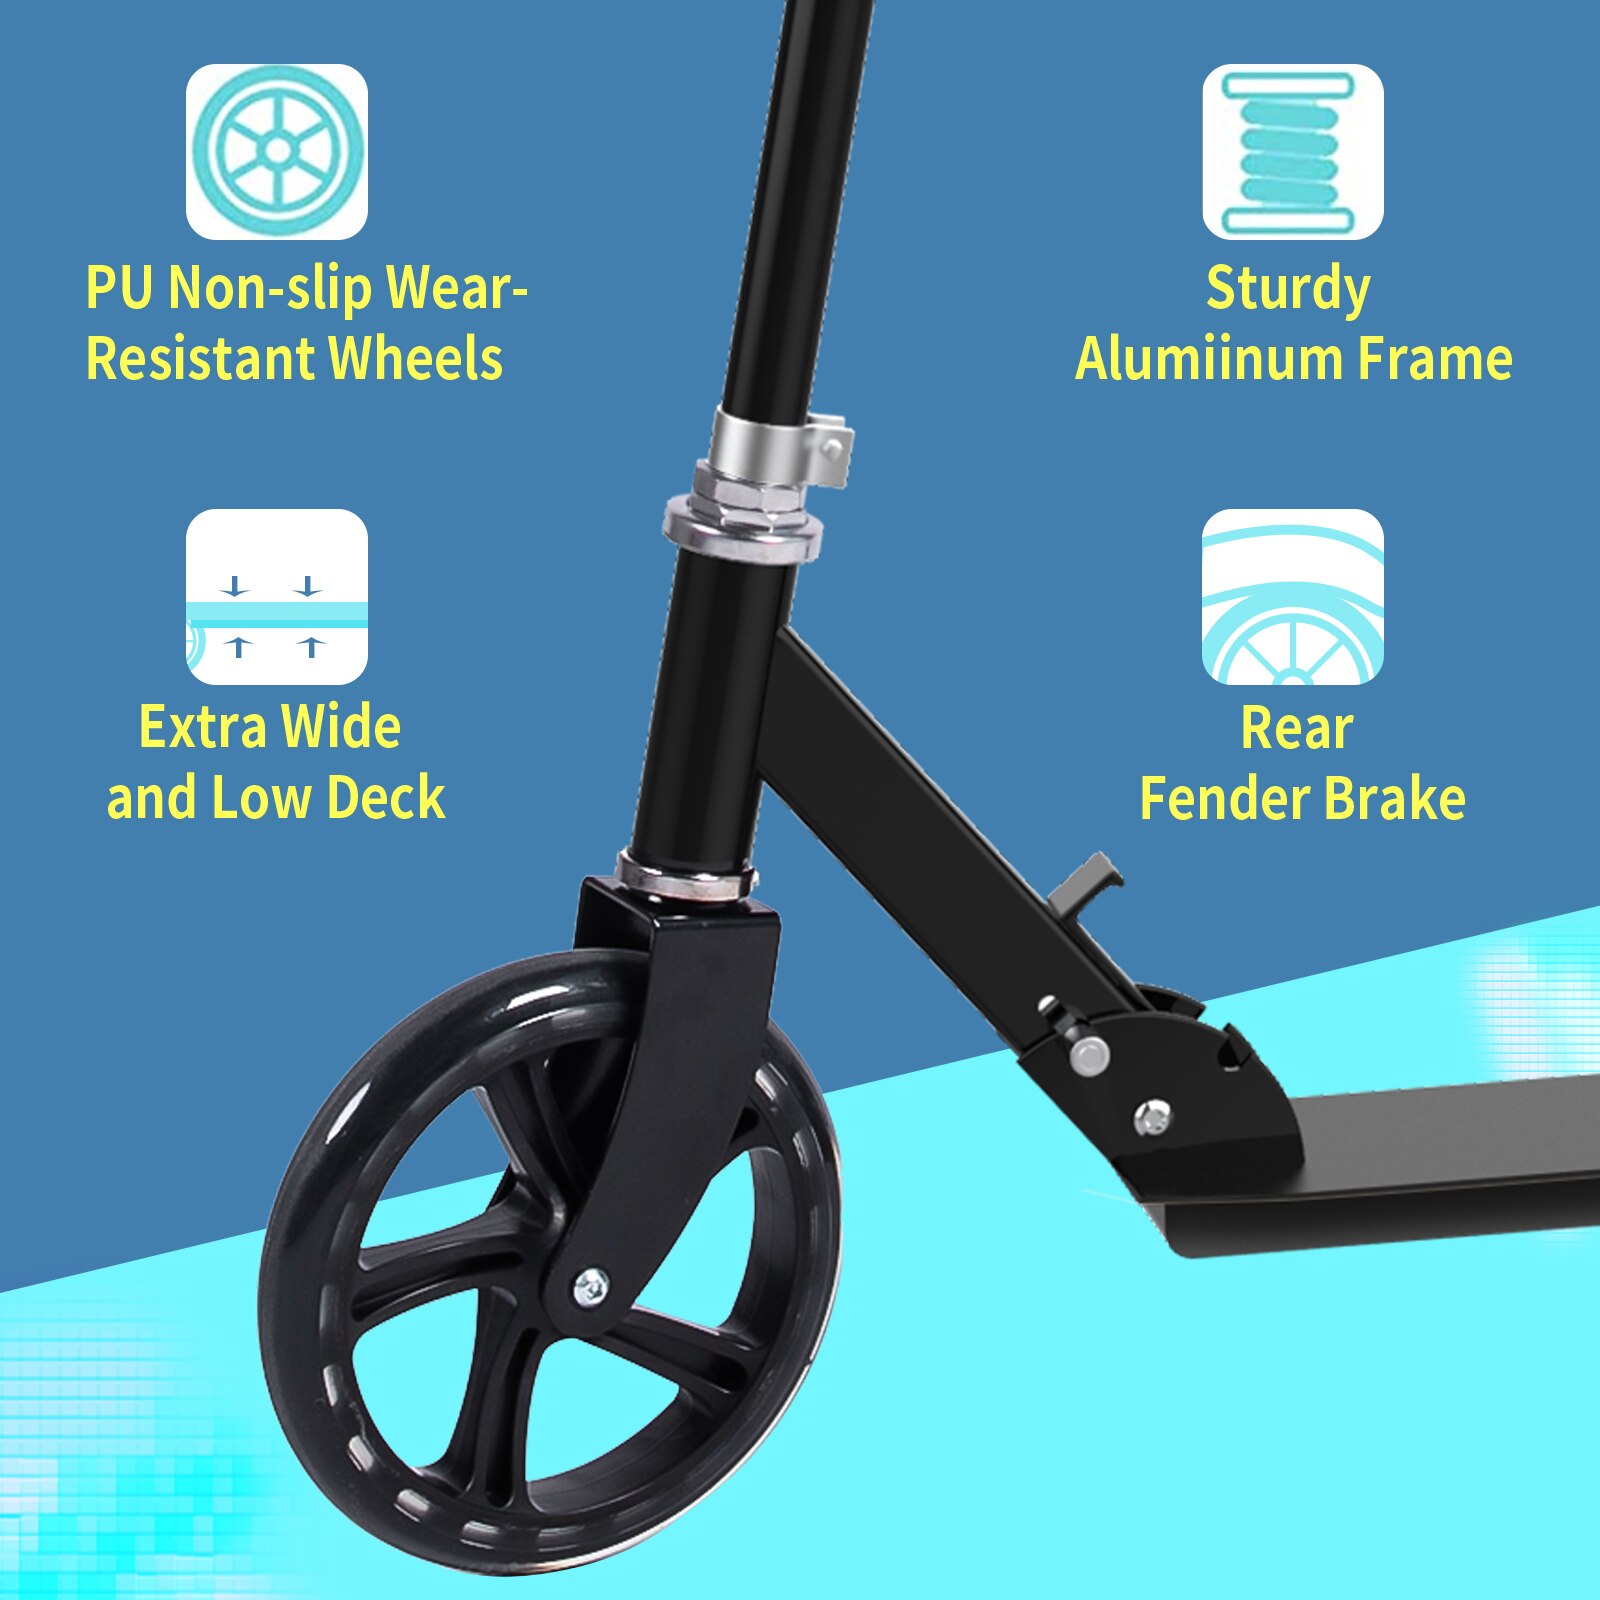 Scooter for Adults and Kids, Foldable Scooter 2 Wheel, Folding Grips Handlebar Adjusts to 3 Heights, 220 Lbs Weight Capacity